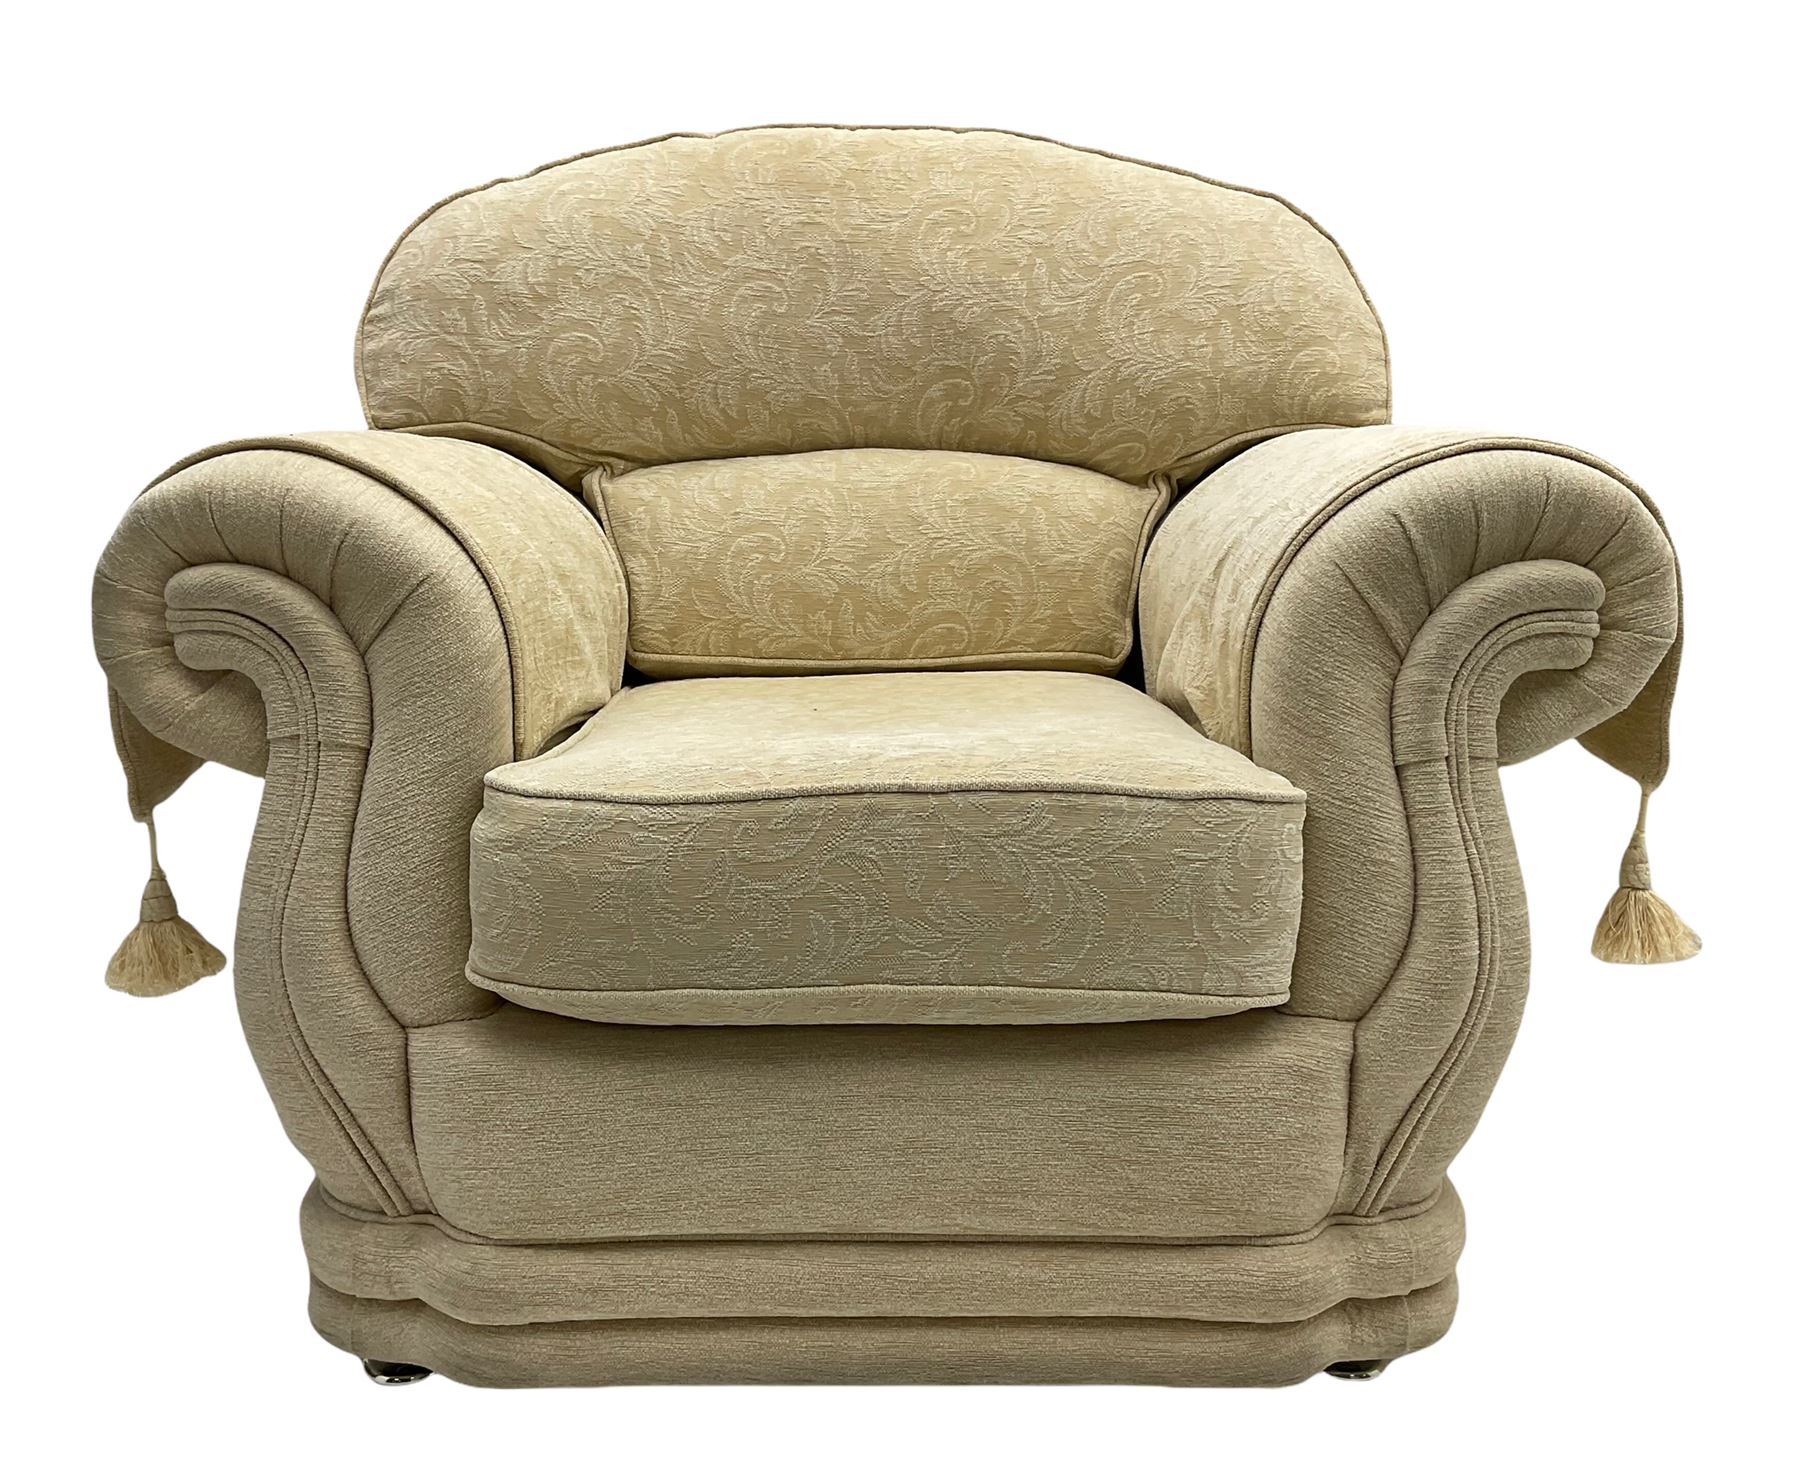 Three piece lounge suite upholstered in beige plain and embossed fabric - Image 7 of 10